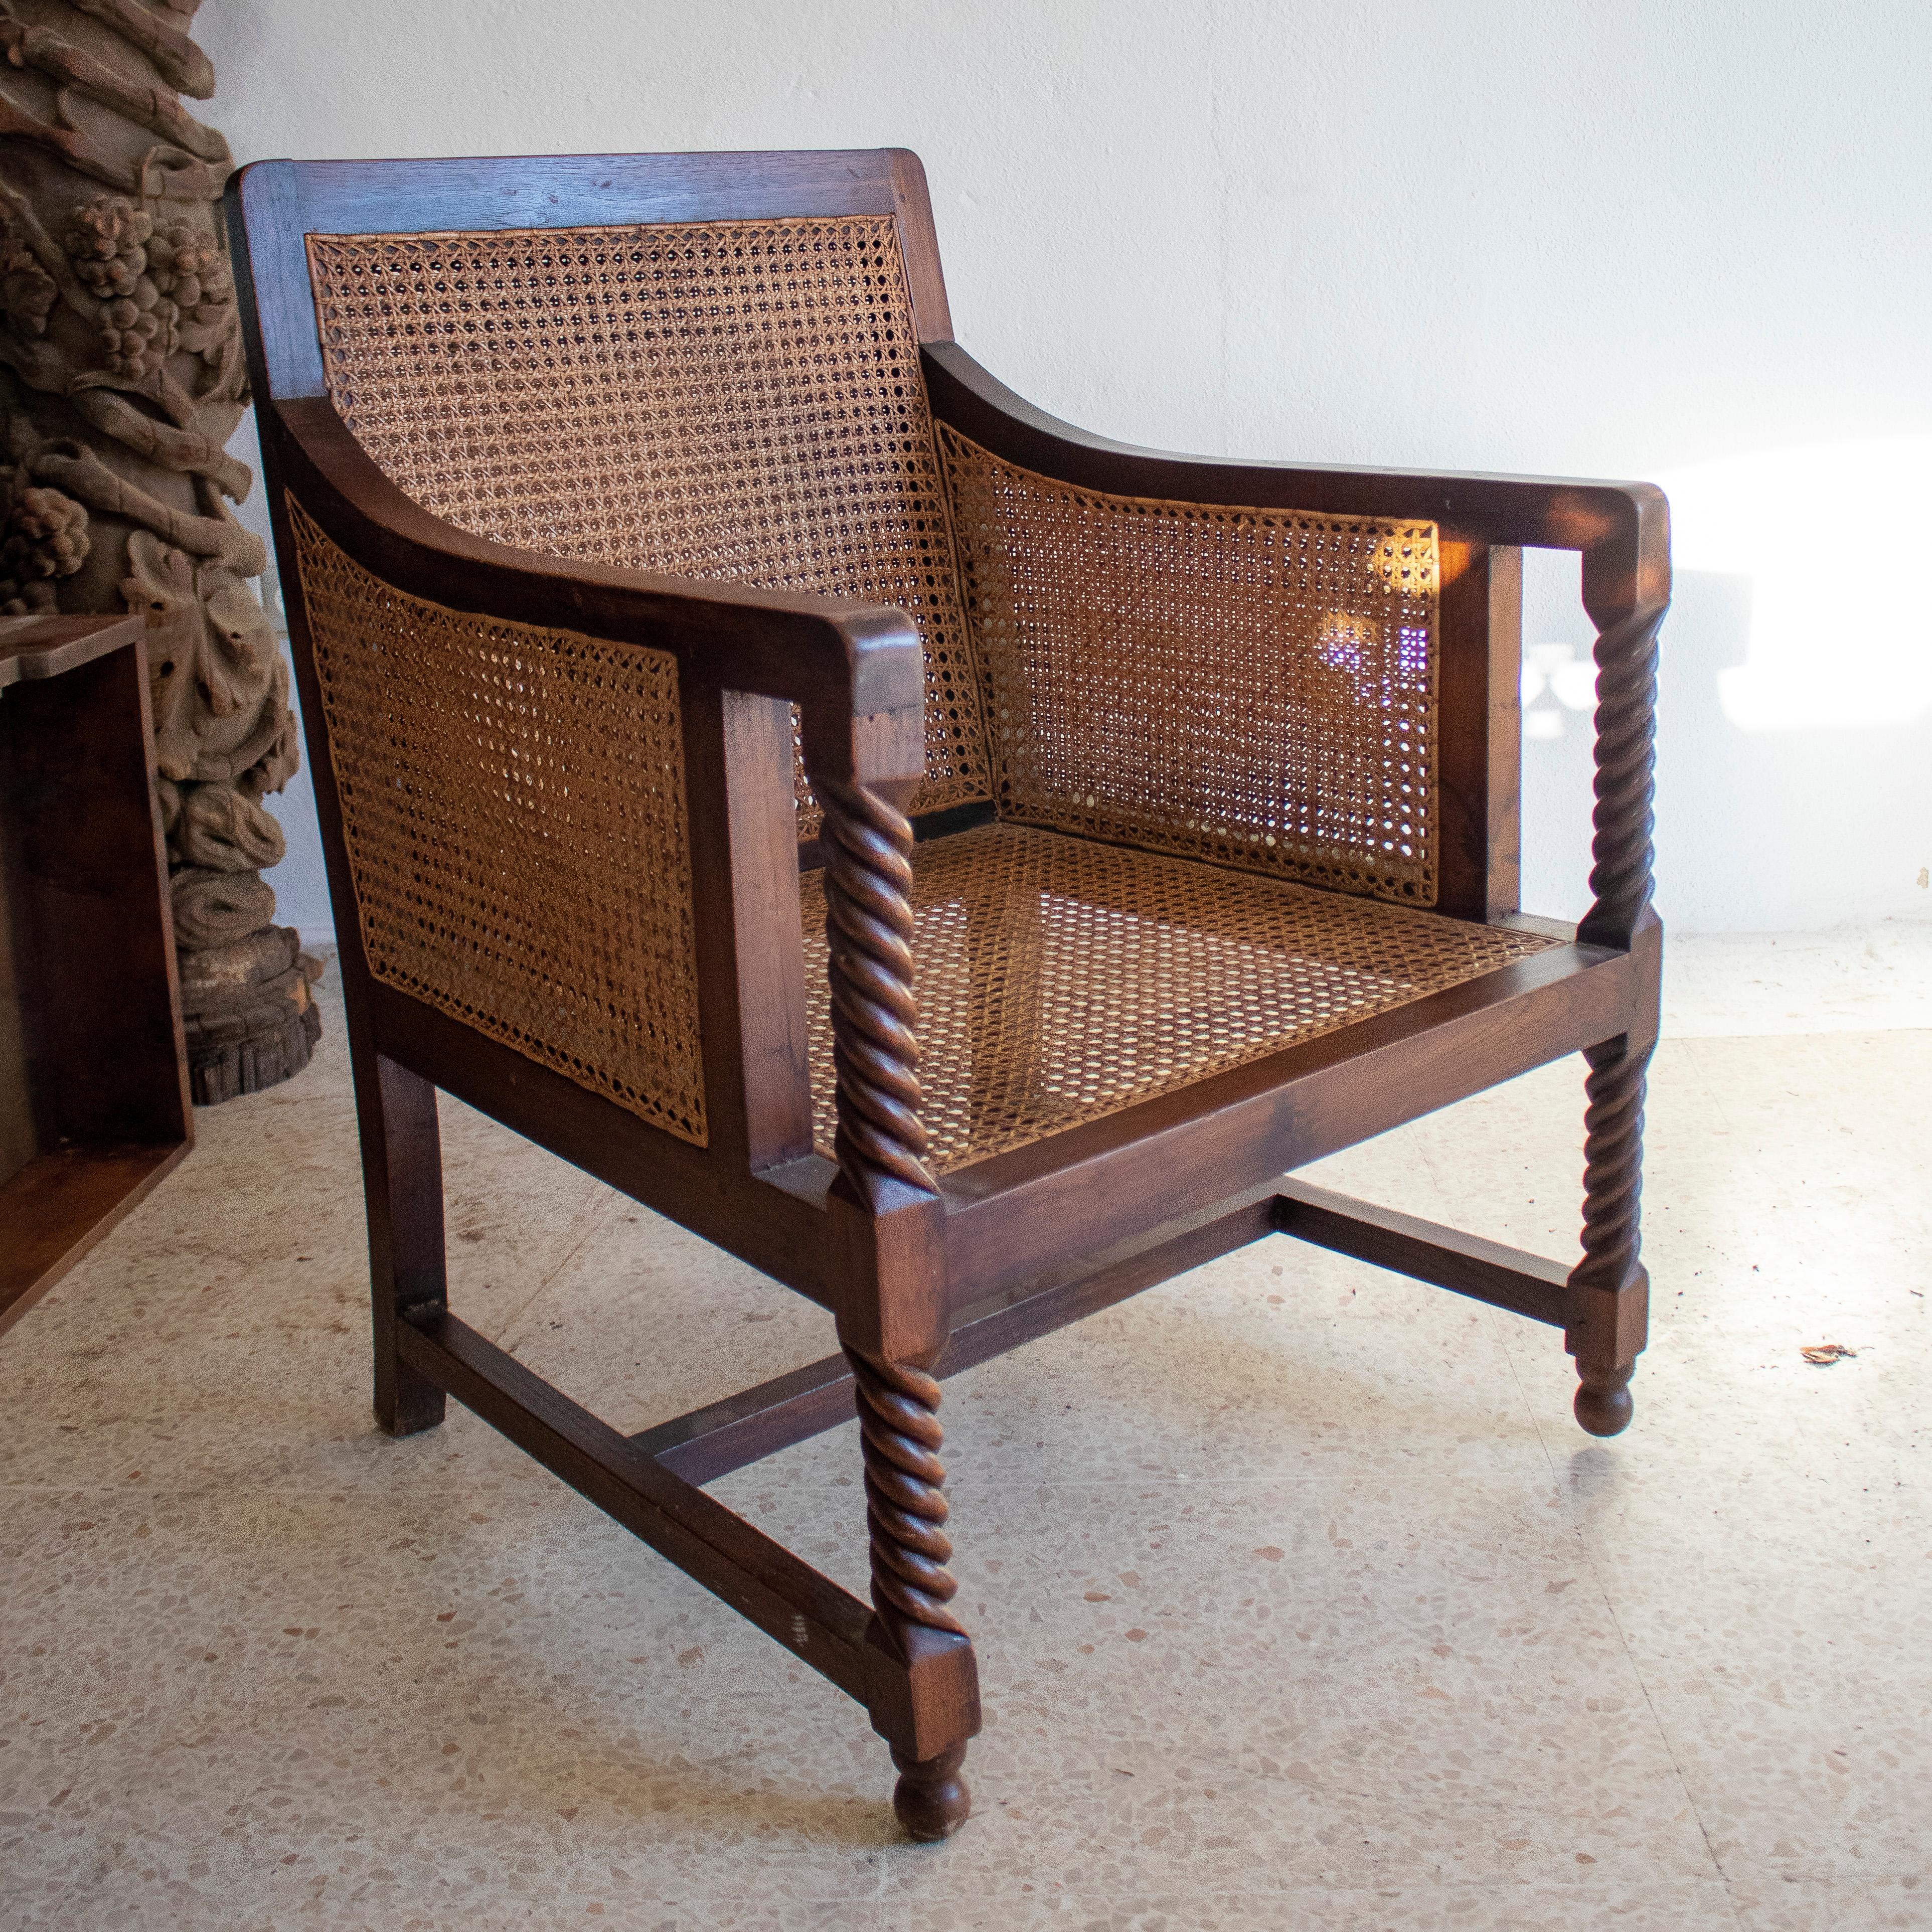 Pair of 1970s Spanish wood and woven cane sofa chairs with spindle armrest support.